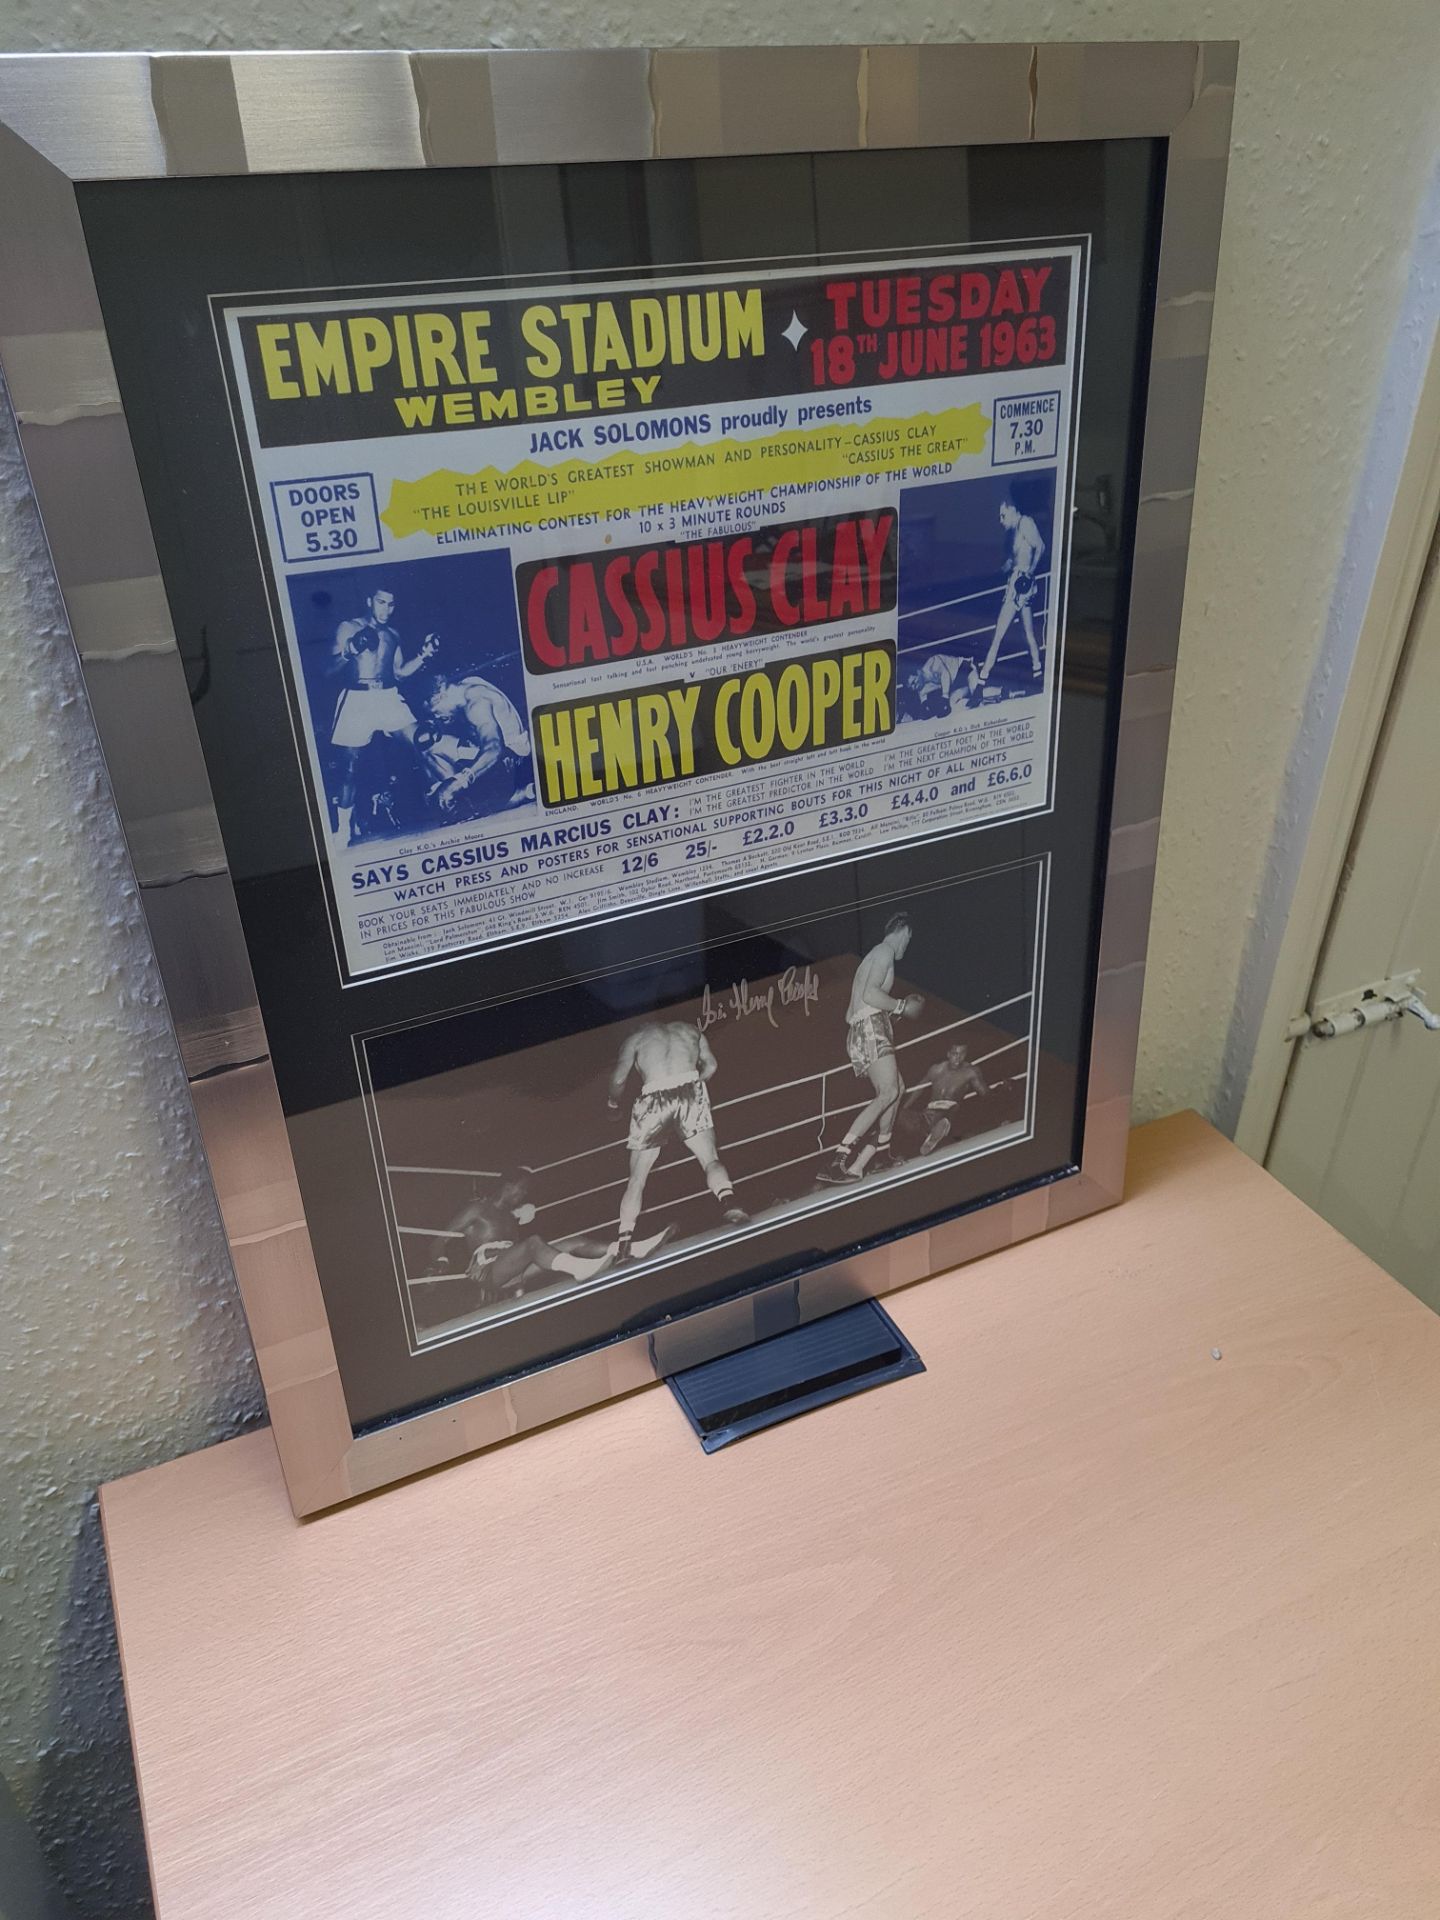 Signed Framed Photo & Advertising Flyer of Cassius Clay v Henry Cooper Fight 18/06/1963, signed by